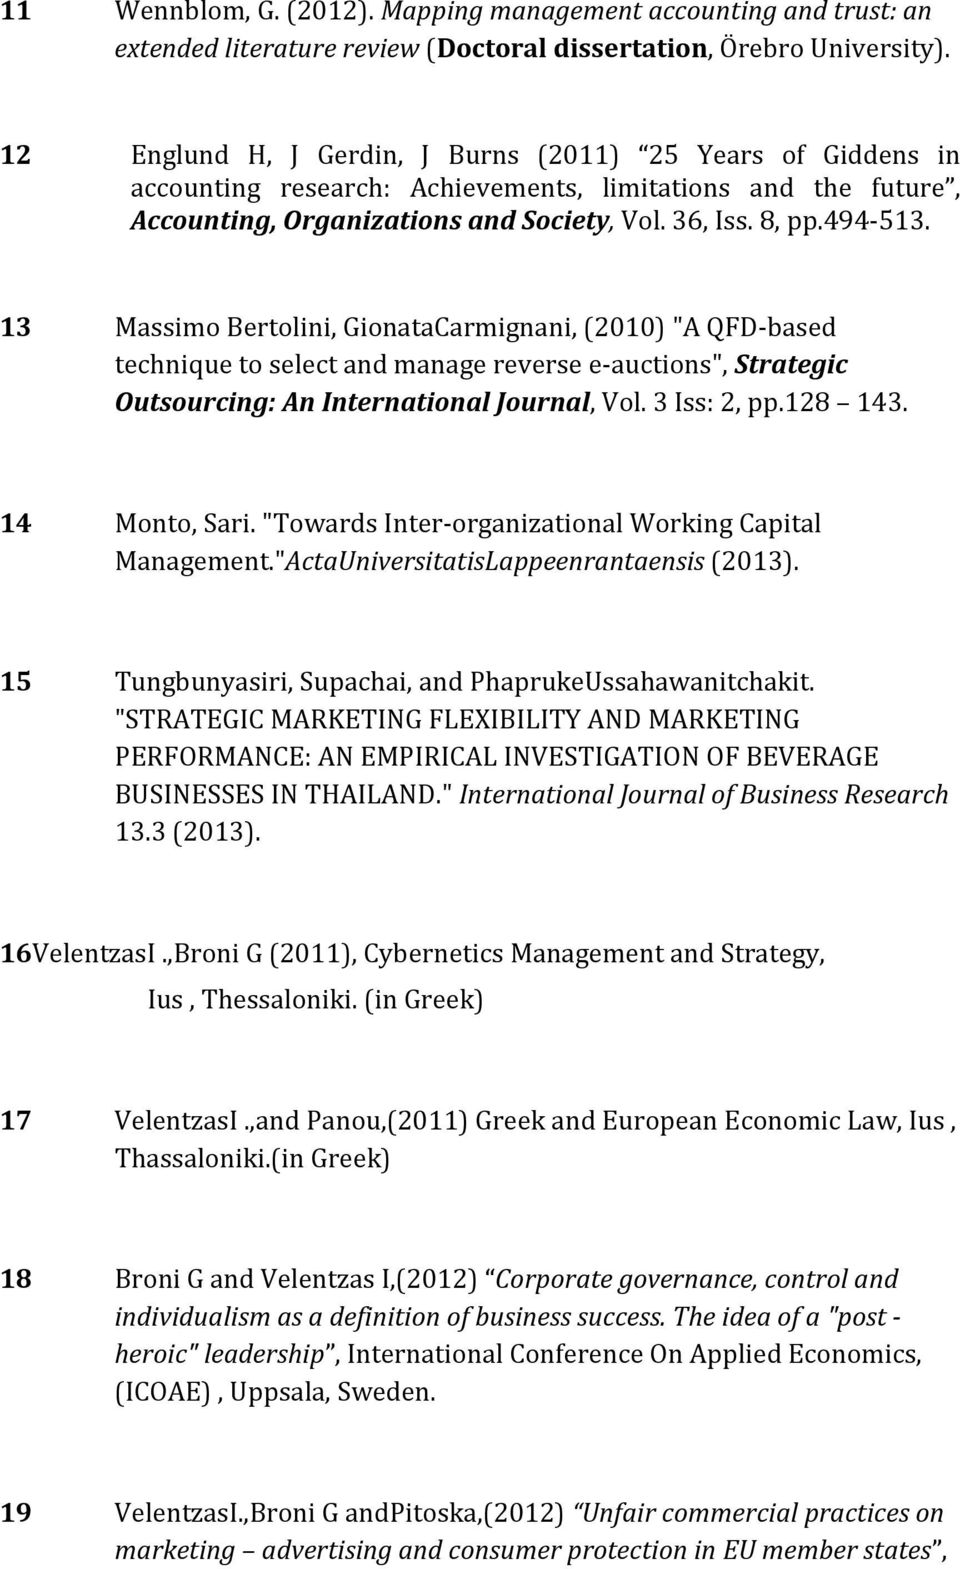 13 Massimo Bertolini, GionataCarmignani, (2010) "A QFD-based technique to select and manage reverse e-auctions", Strategic Outsourcing: An International Journal, Vol. 3 Iss: 2, pp.128 143.